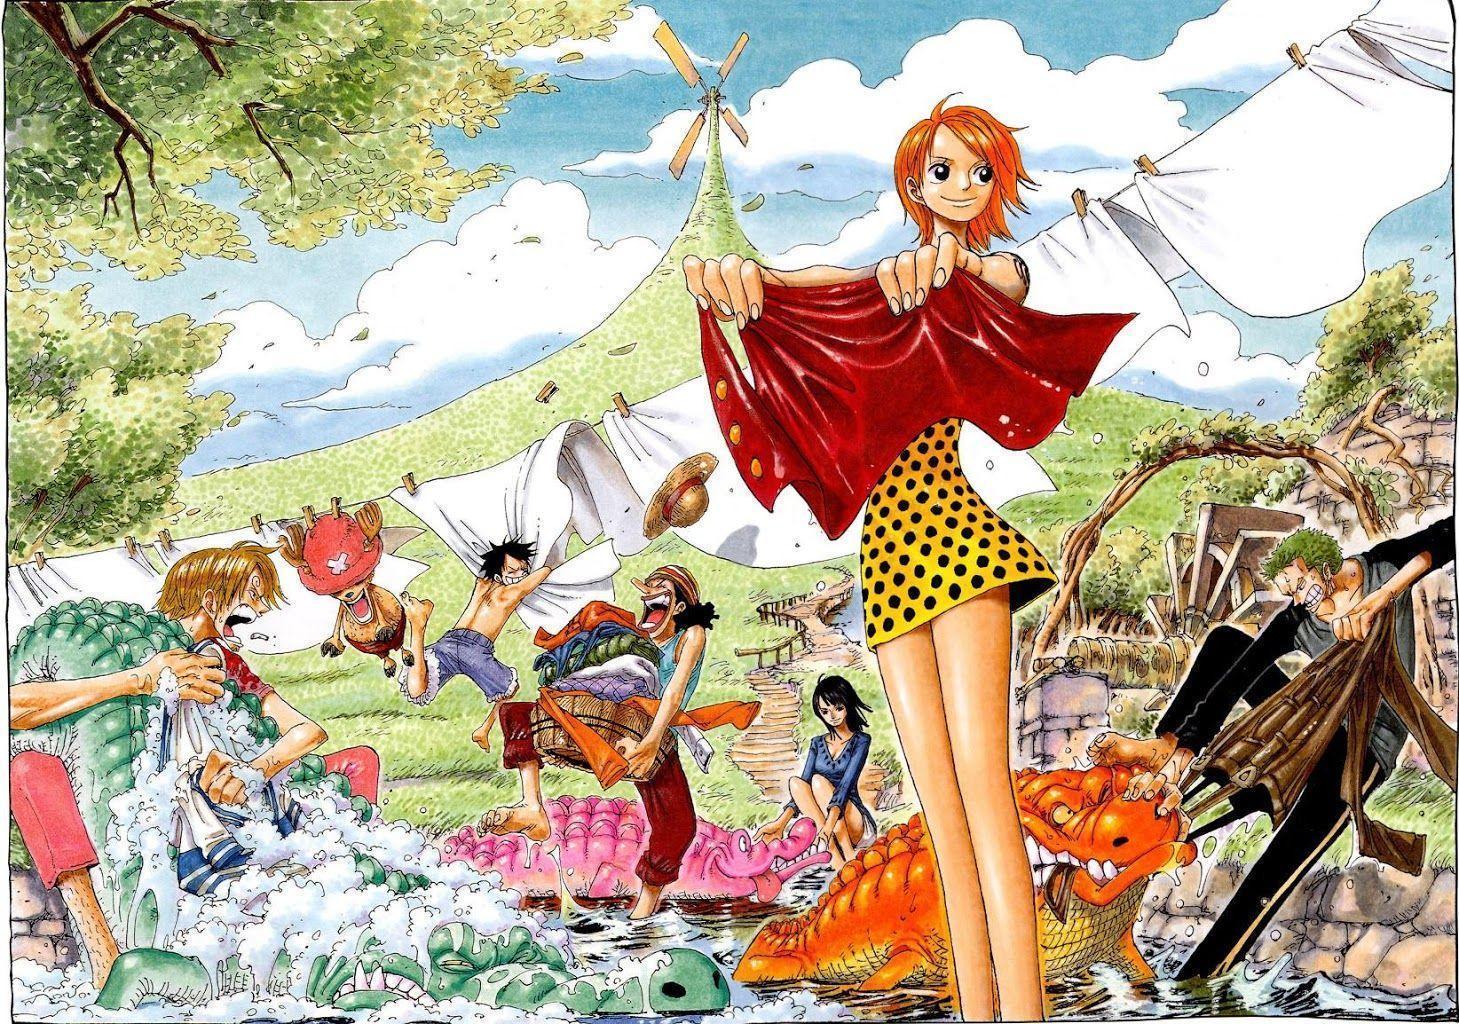 Download One Piece Wallpaper HD for android, One Piece Wallpaper